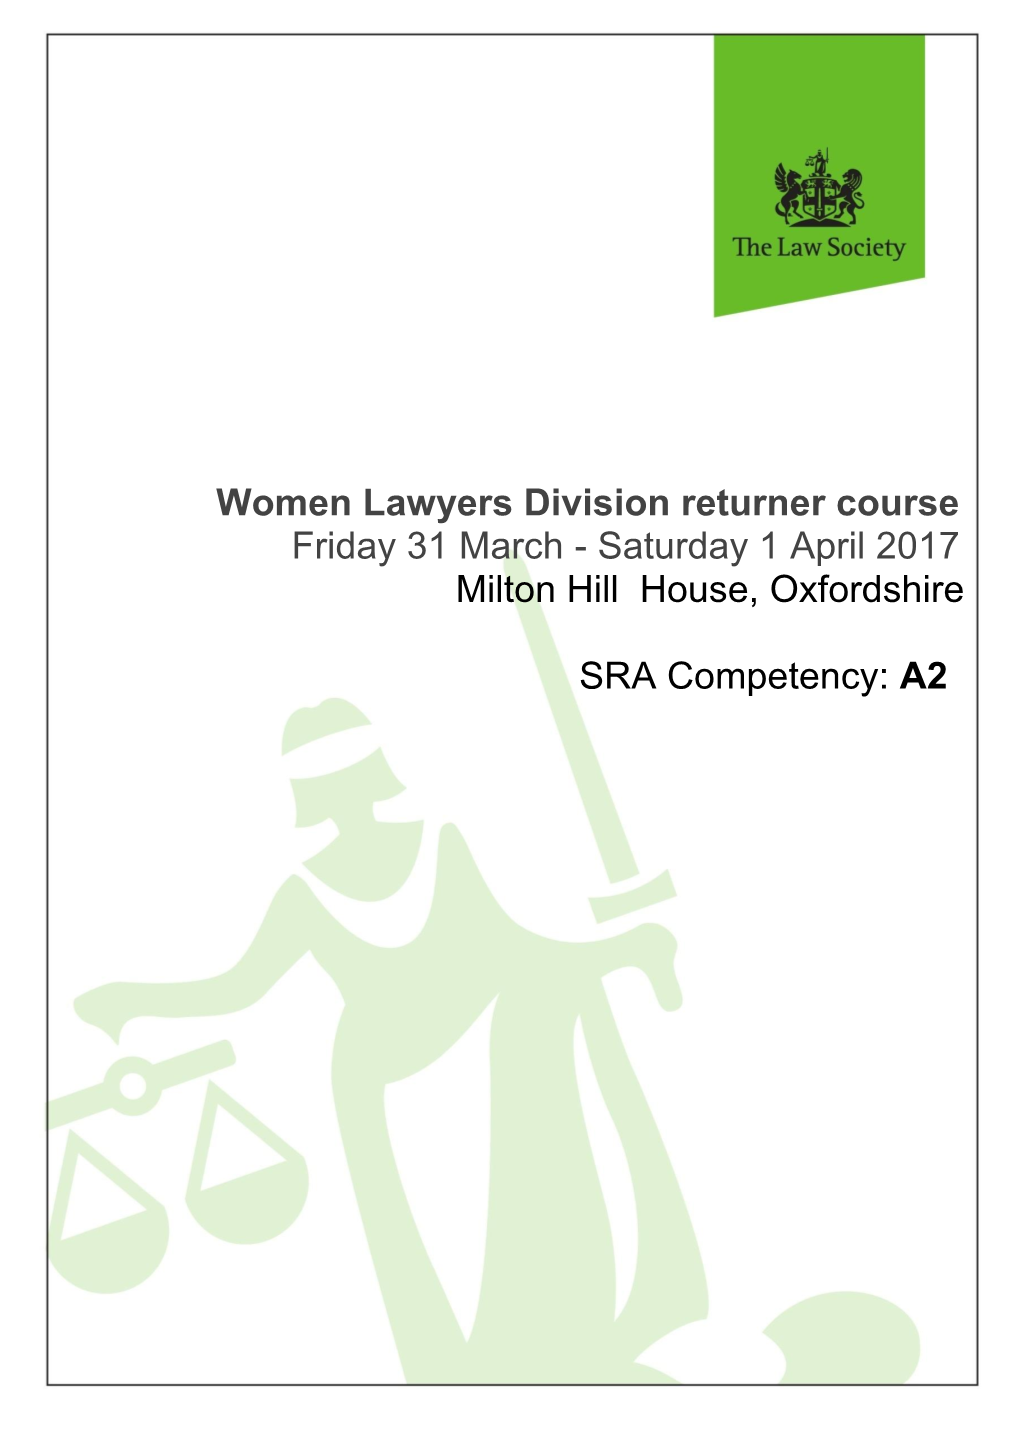 Women Lawyers Division Returner Course Friday 31 March - Saturday 1 April 2017 Milton Hill House, Oxfordshire